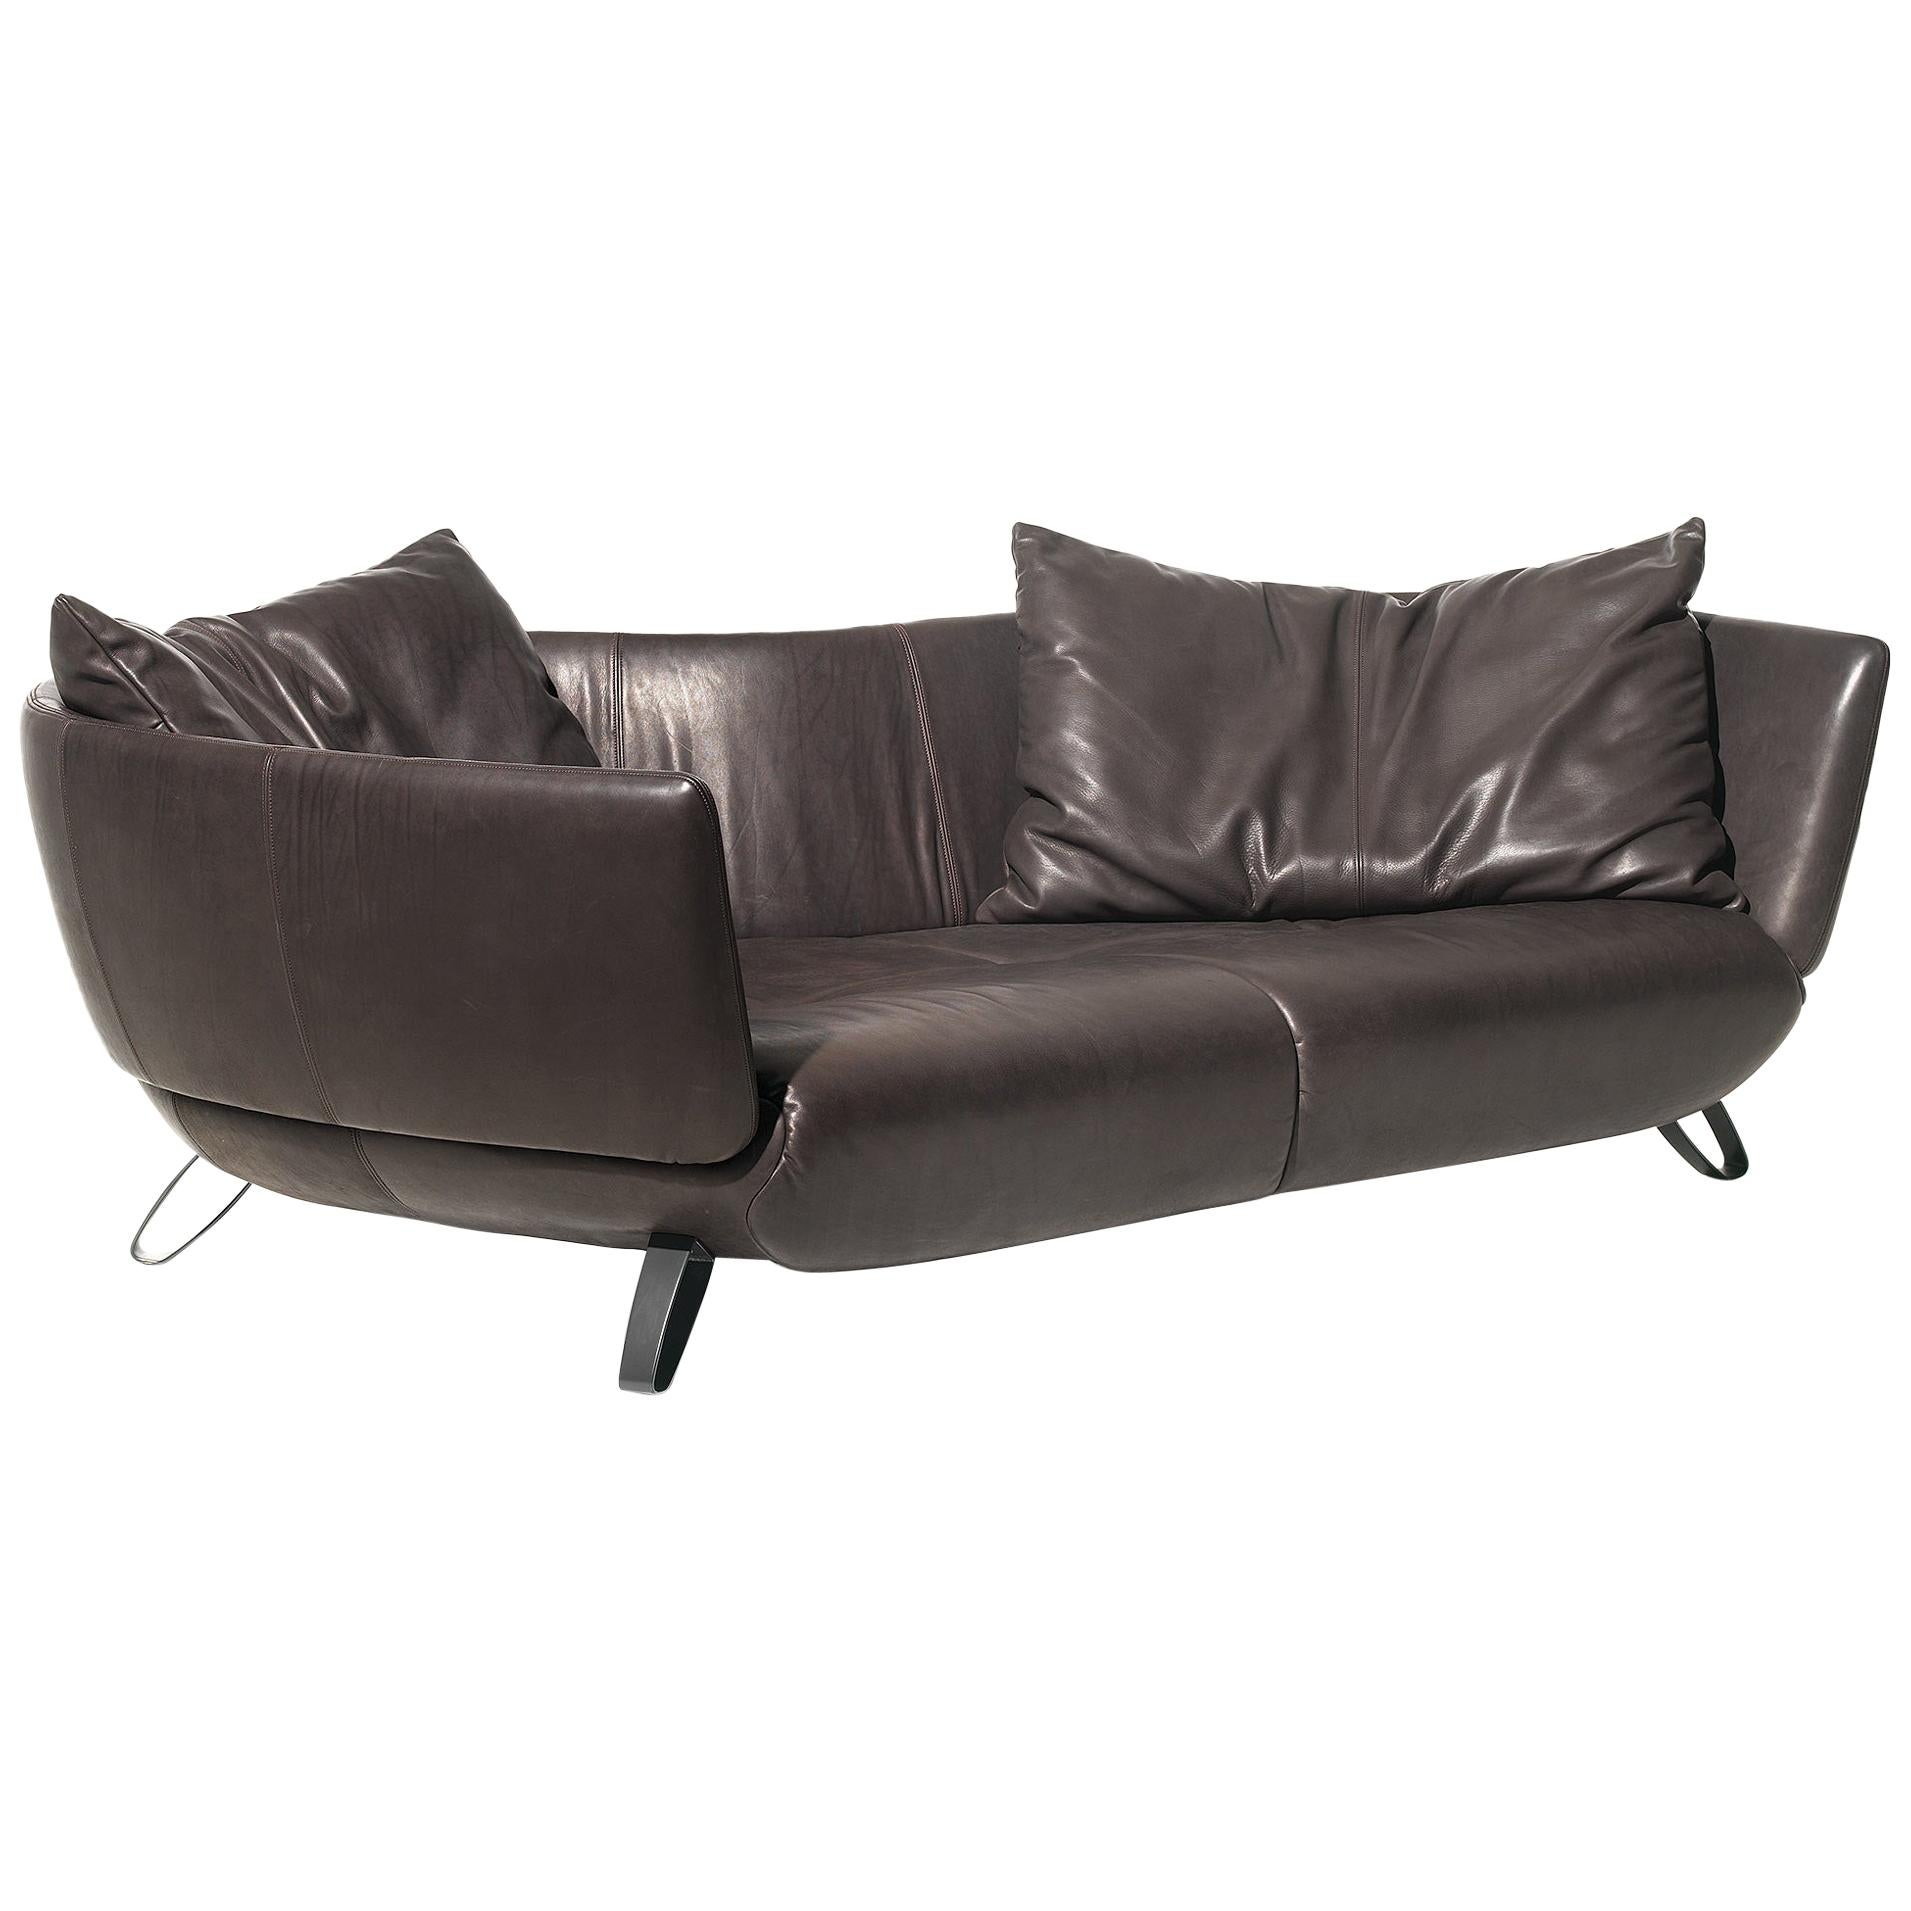 DS-102 Sofa by De Sede For Sale at 1stDibs